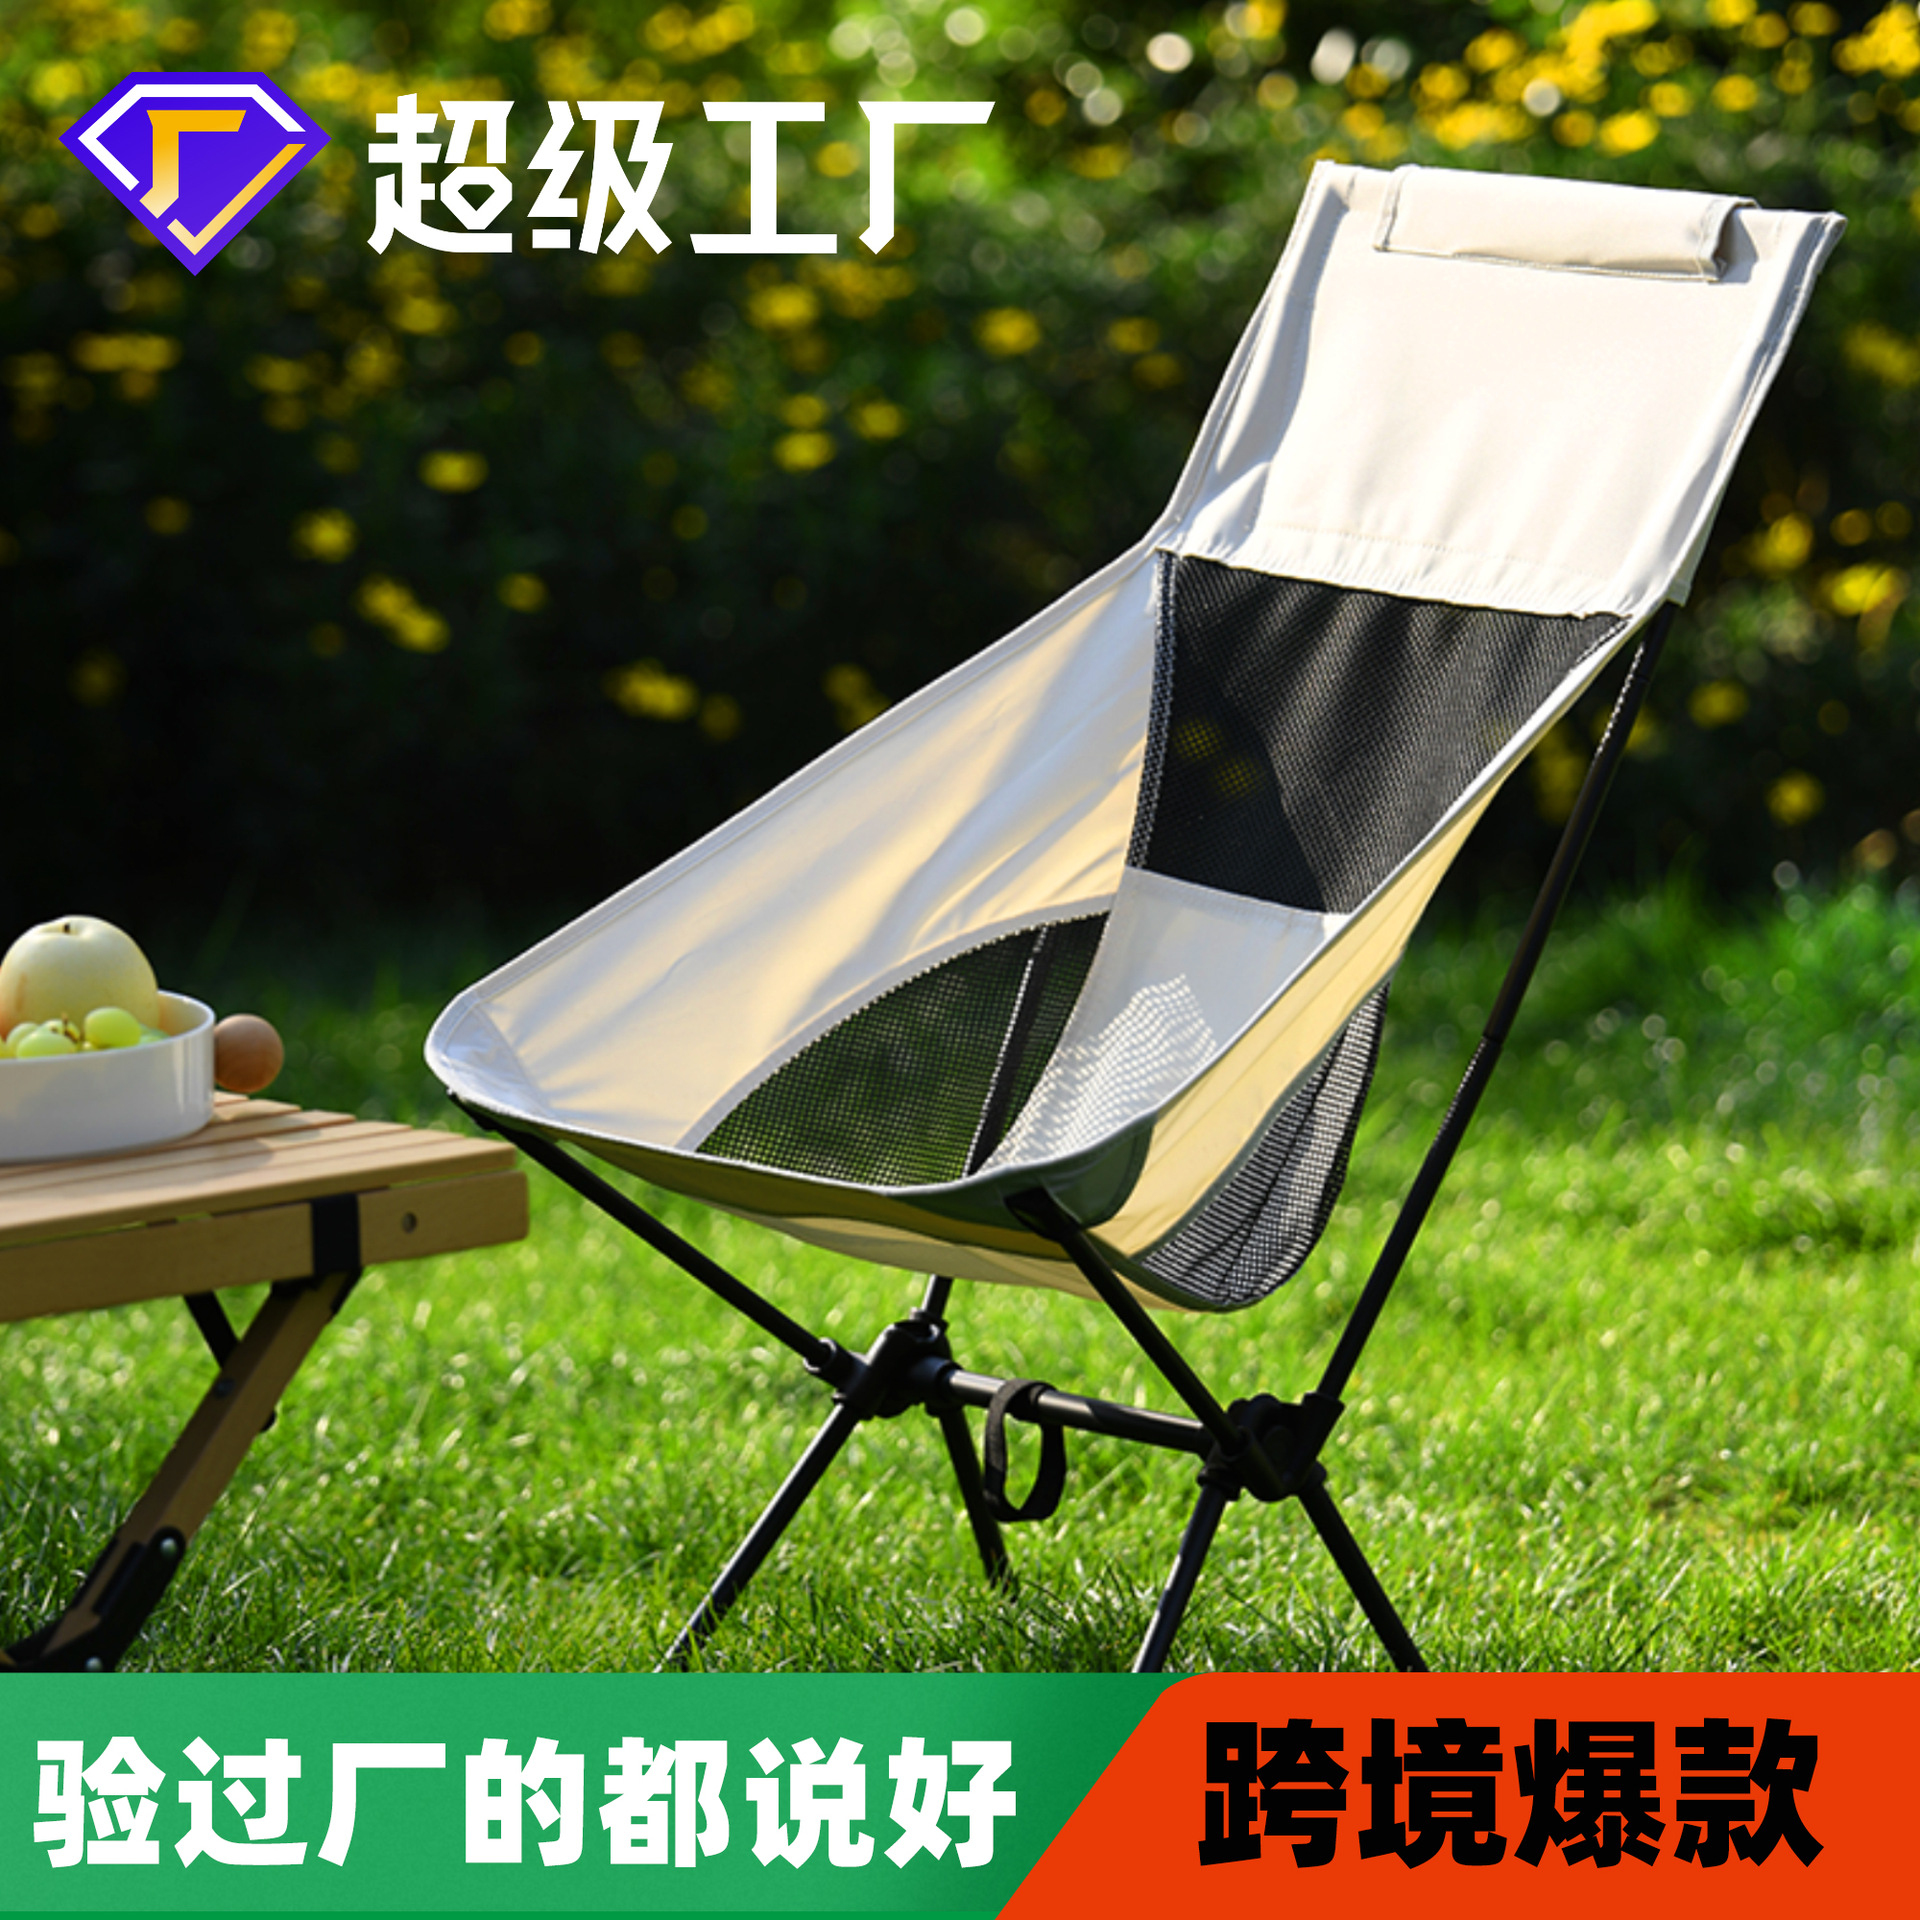 outdoor folding table and chair space chair portable moon chair wholesale camping folding chair camping fishing beach chair